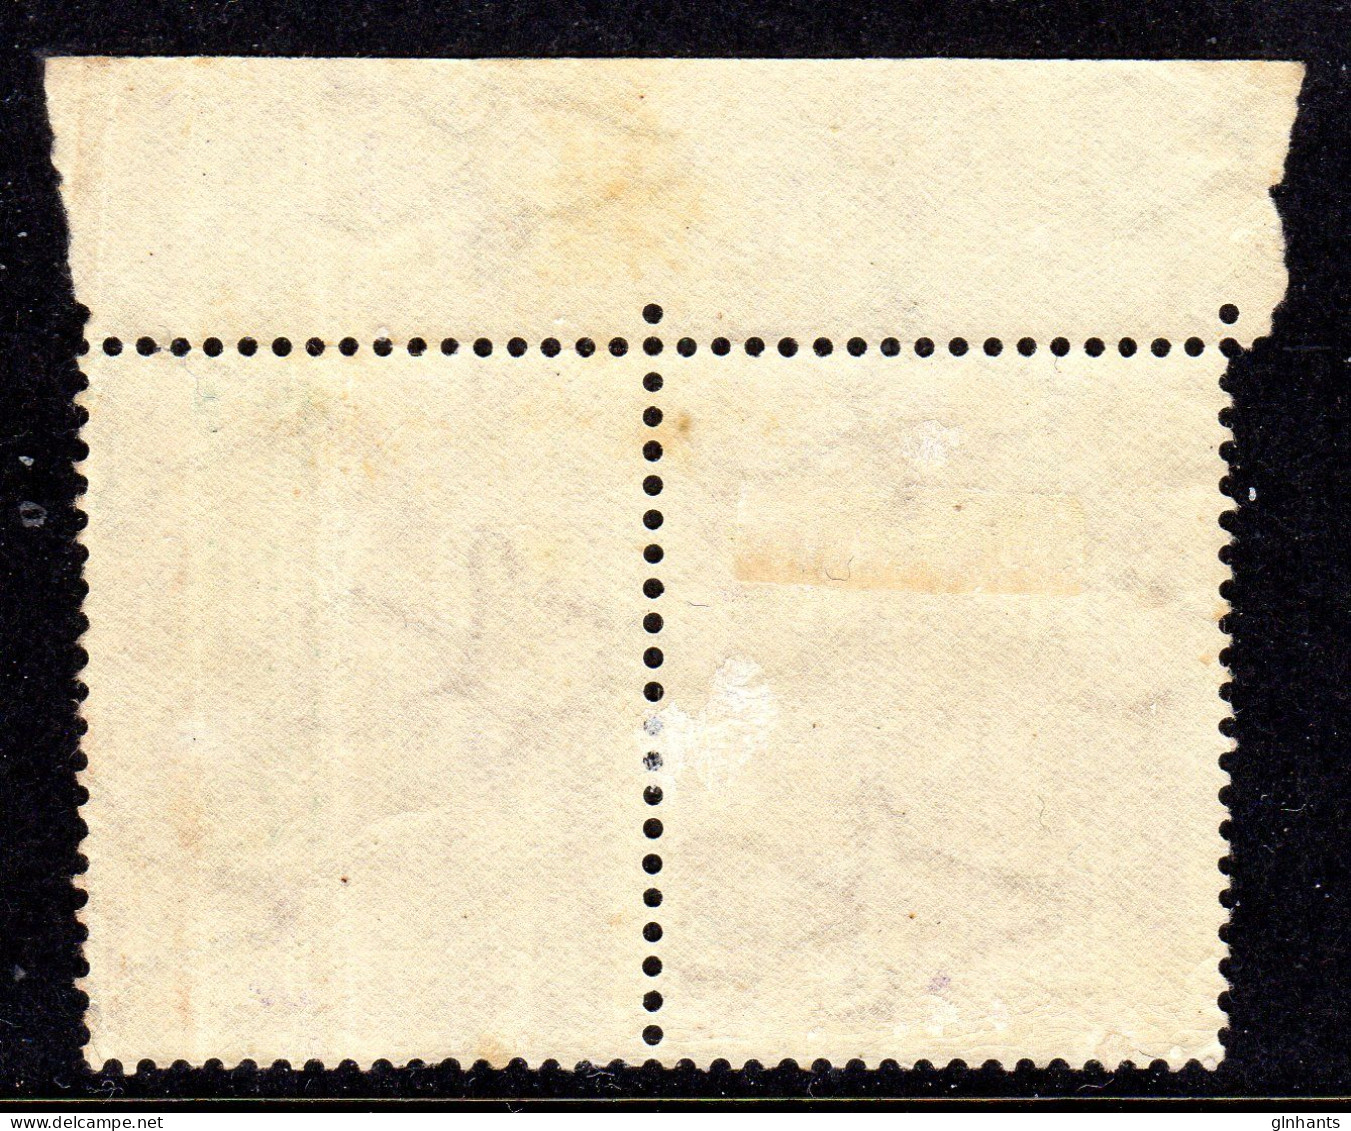 SOUTH AFRICA - 1941 4d GUN ARTILLARY HORIZONTAL PAIR MOUNTED MINT MM * SG 92 (2 SCANS) - Unused Stamps